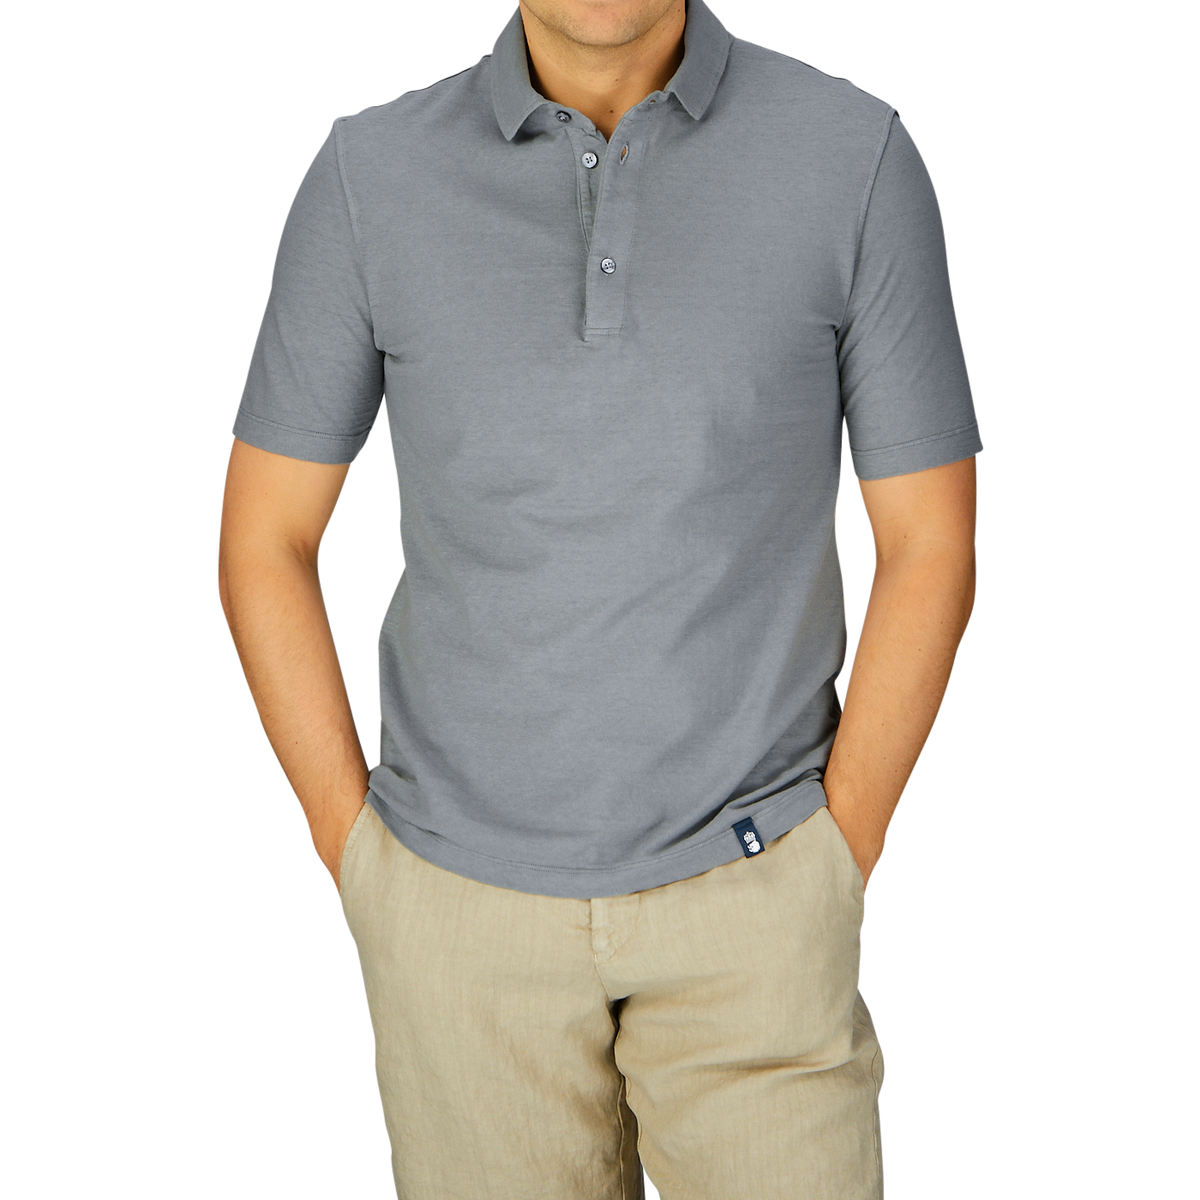 Man wearing a Drumohr steel grey cotton linen polo shirt and beige pants against a gray background.